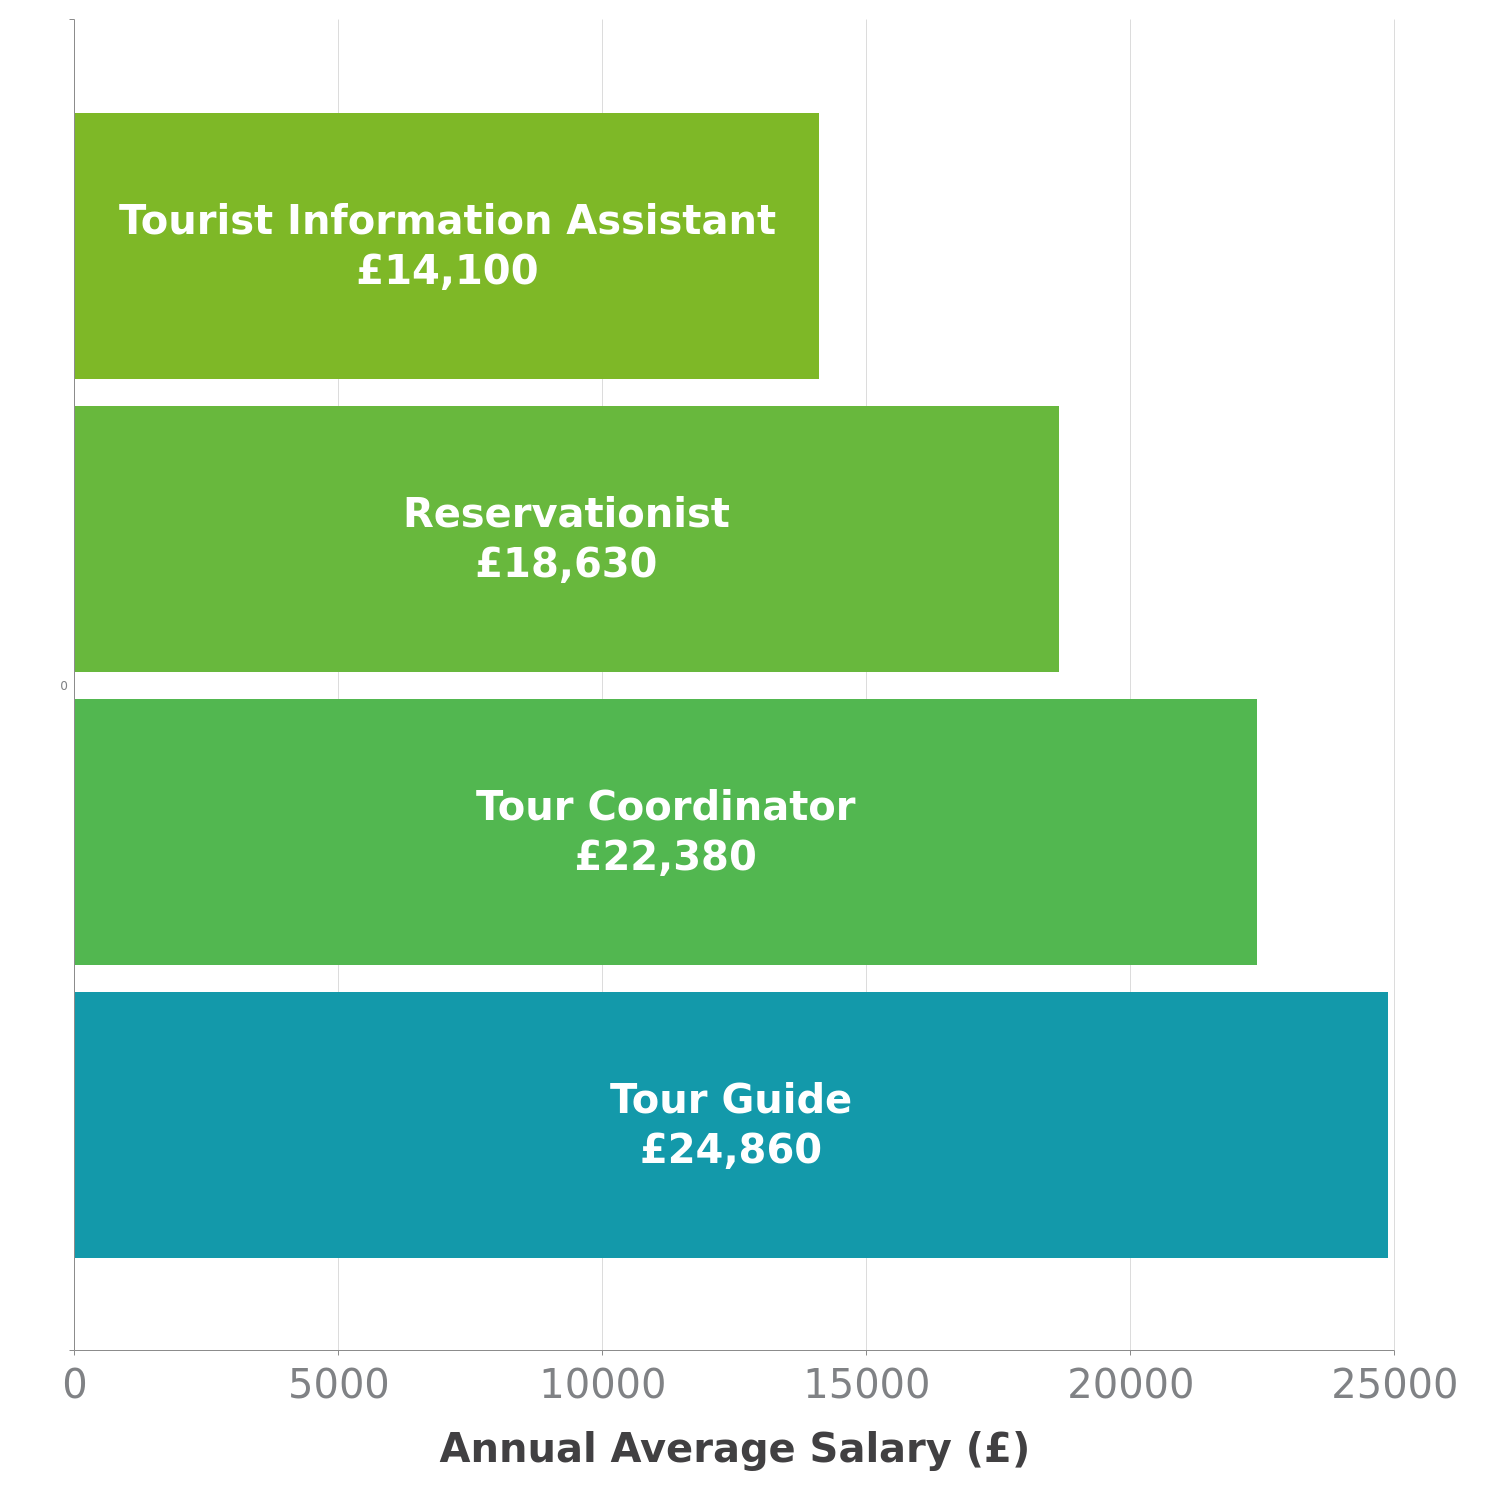 tour guide salary in europe